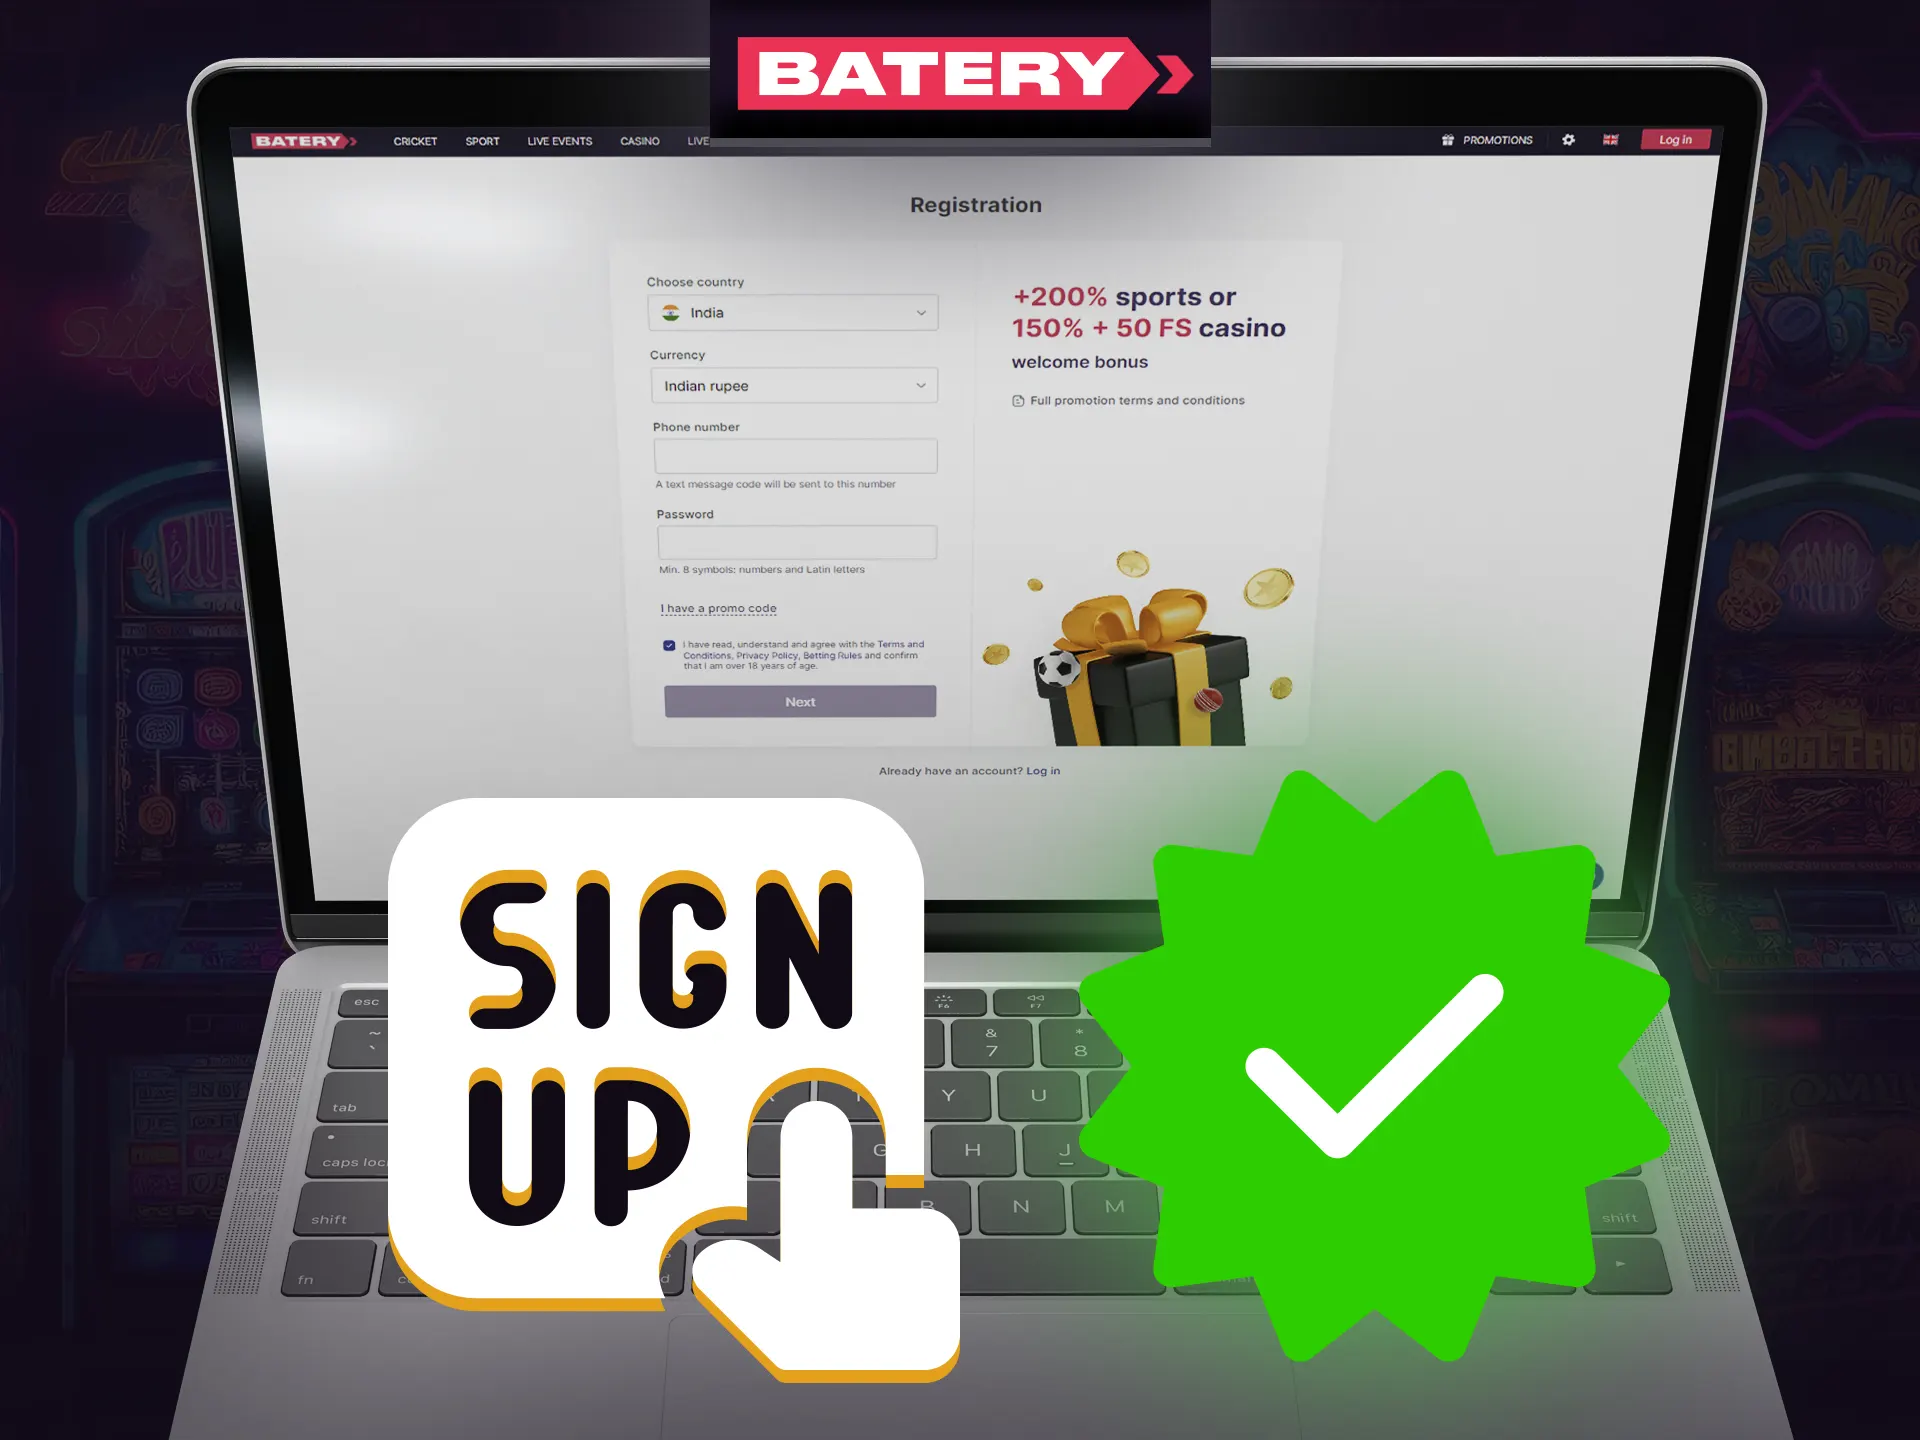 Batery Casino's registration: visit, fill form, create password, confirm, verify, and enjoy.